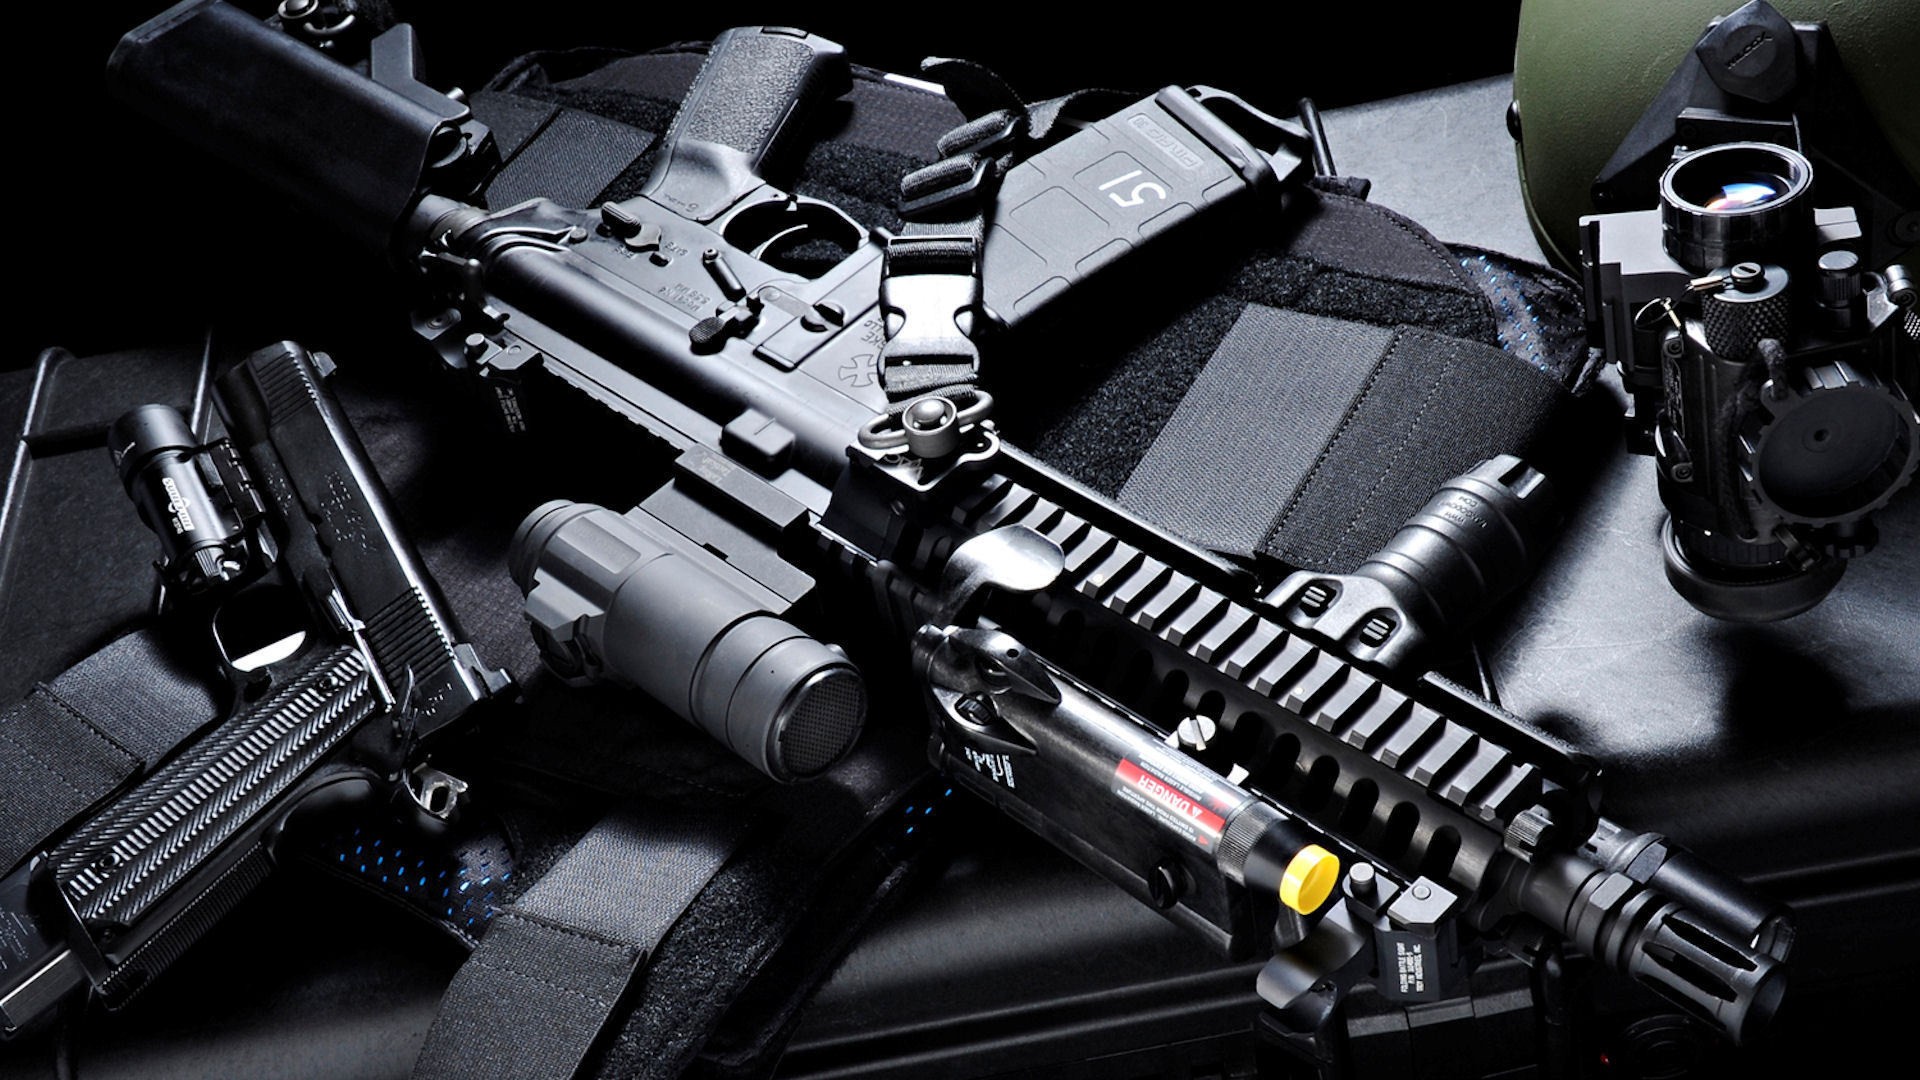 Weapons Assault Rifle HD Wallpaper | Background Image